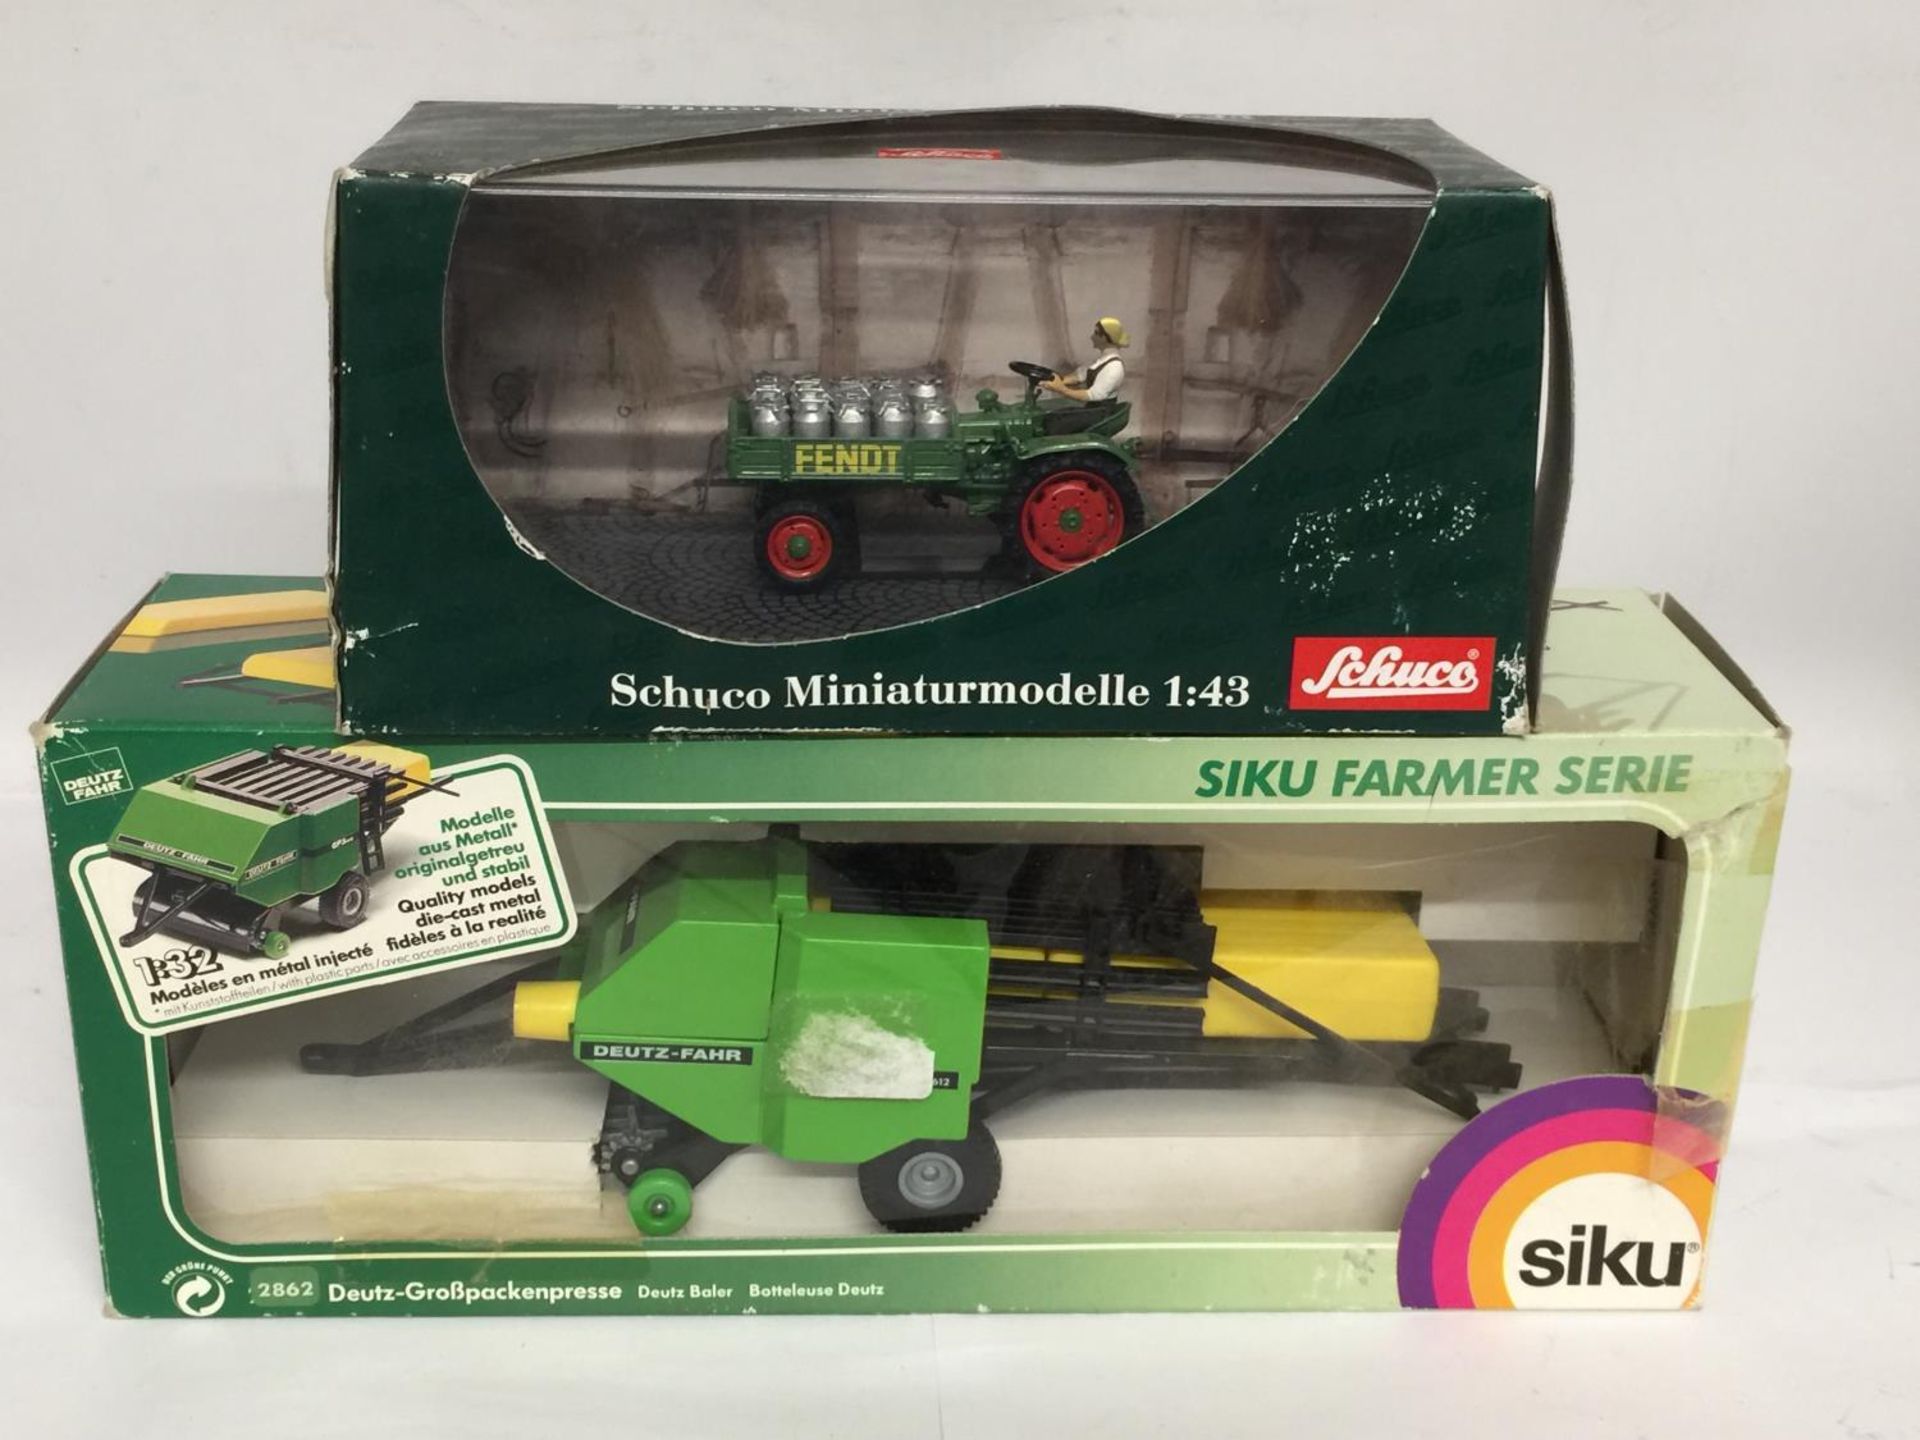 TWO BOXED FARM MODELS, A SCHUCO FENDT TRACTOR, 1/43 SCALE AND A SIKU DEUTZ BALER, 1/32 SCALE